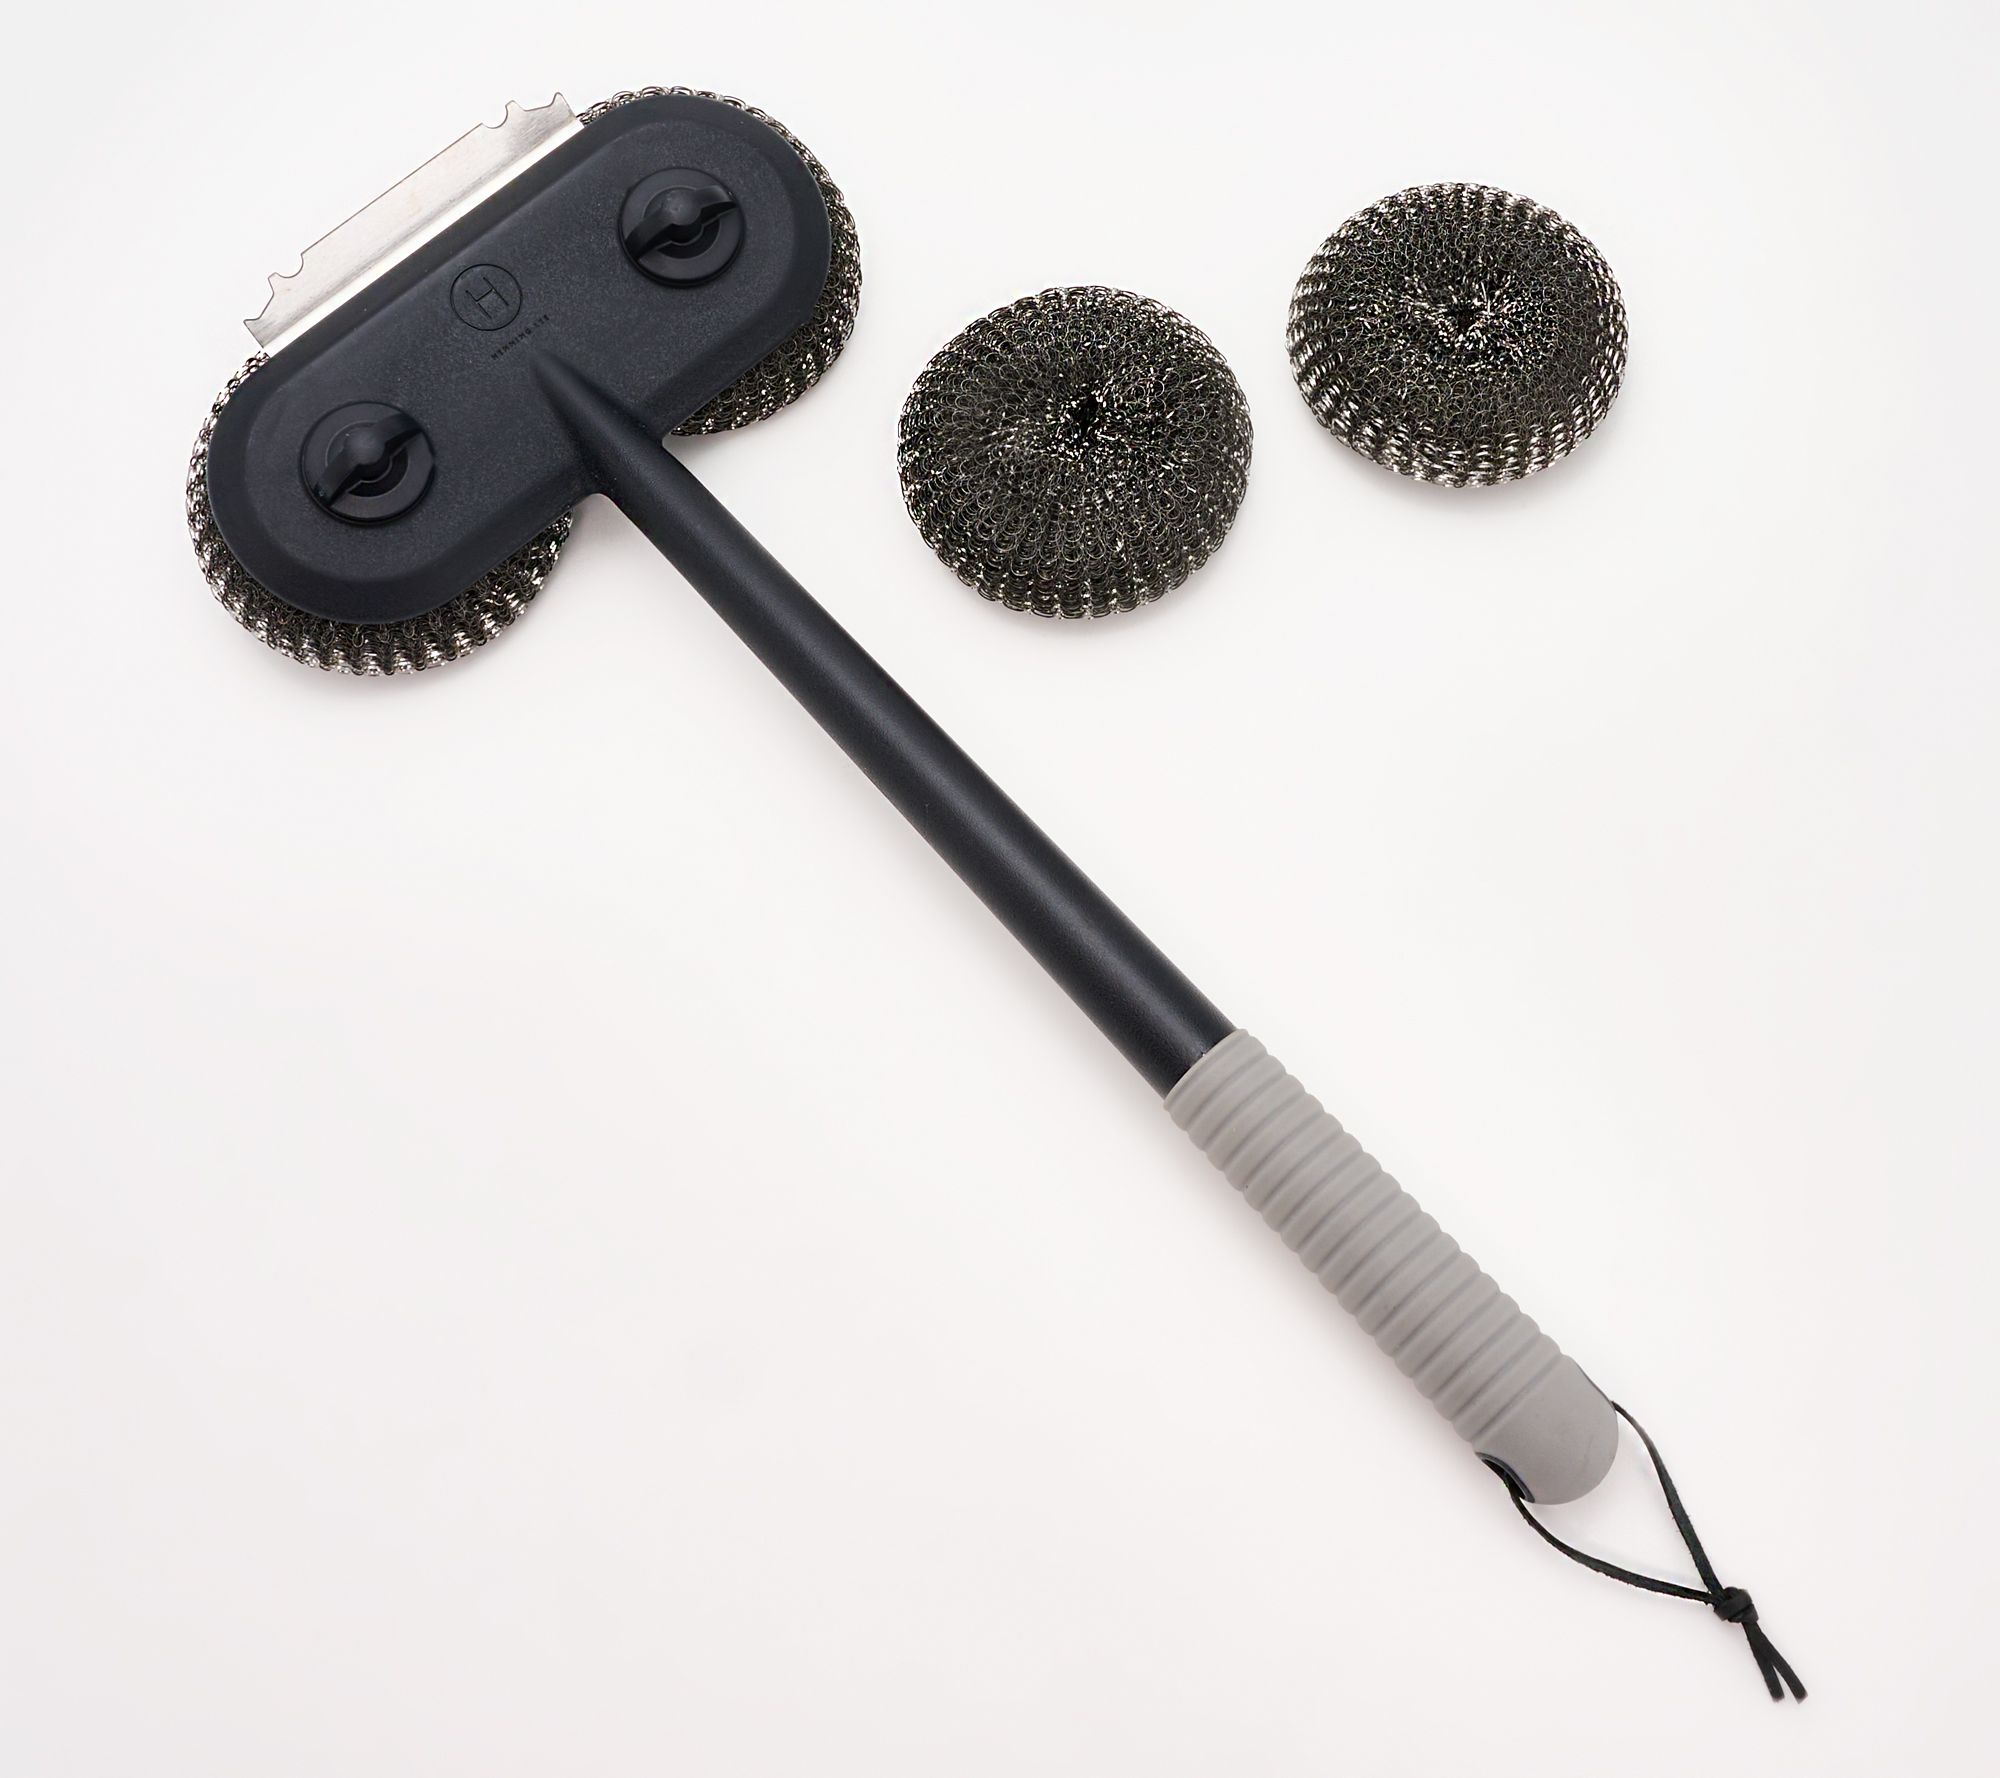 Outset 76414 3head Coconut FBR Grill Brush